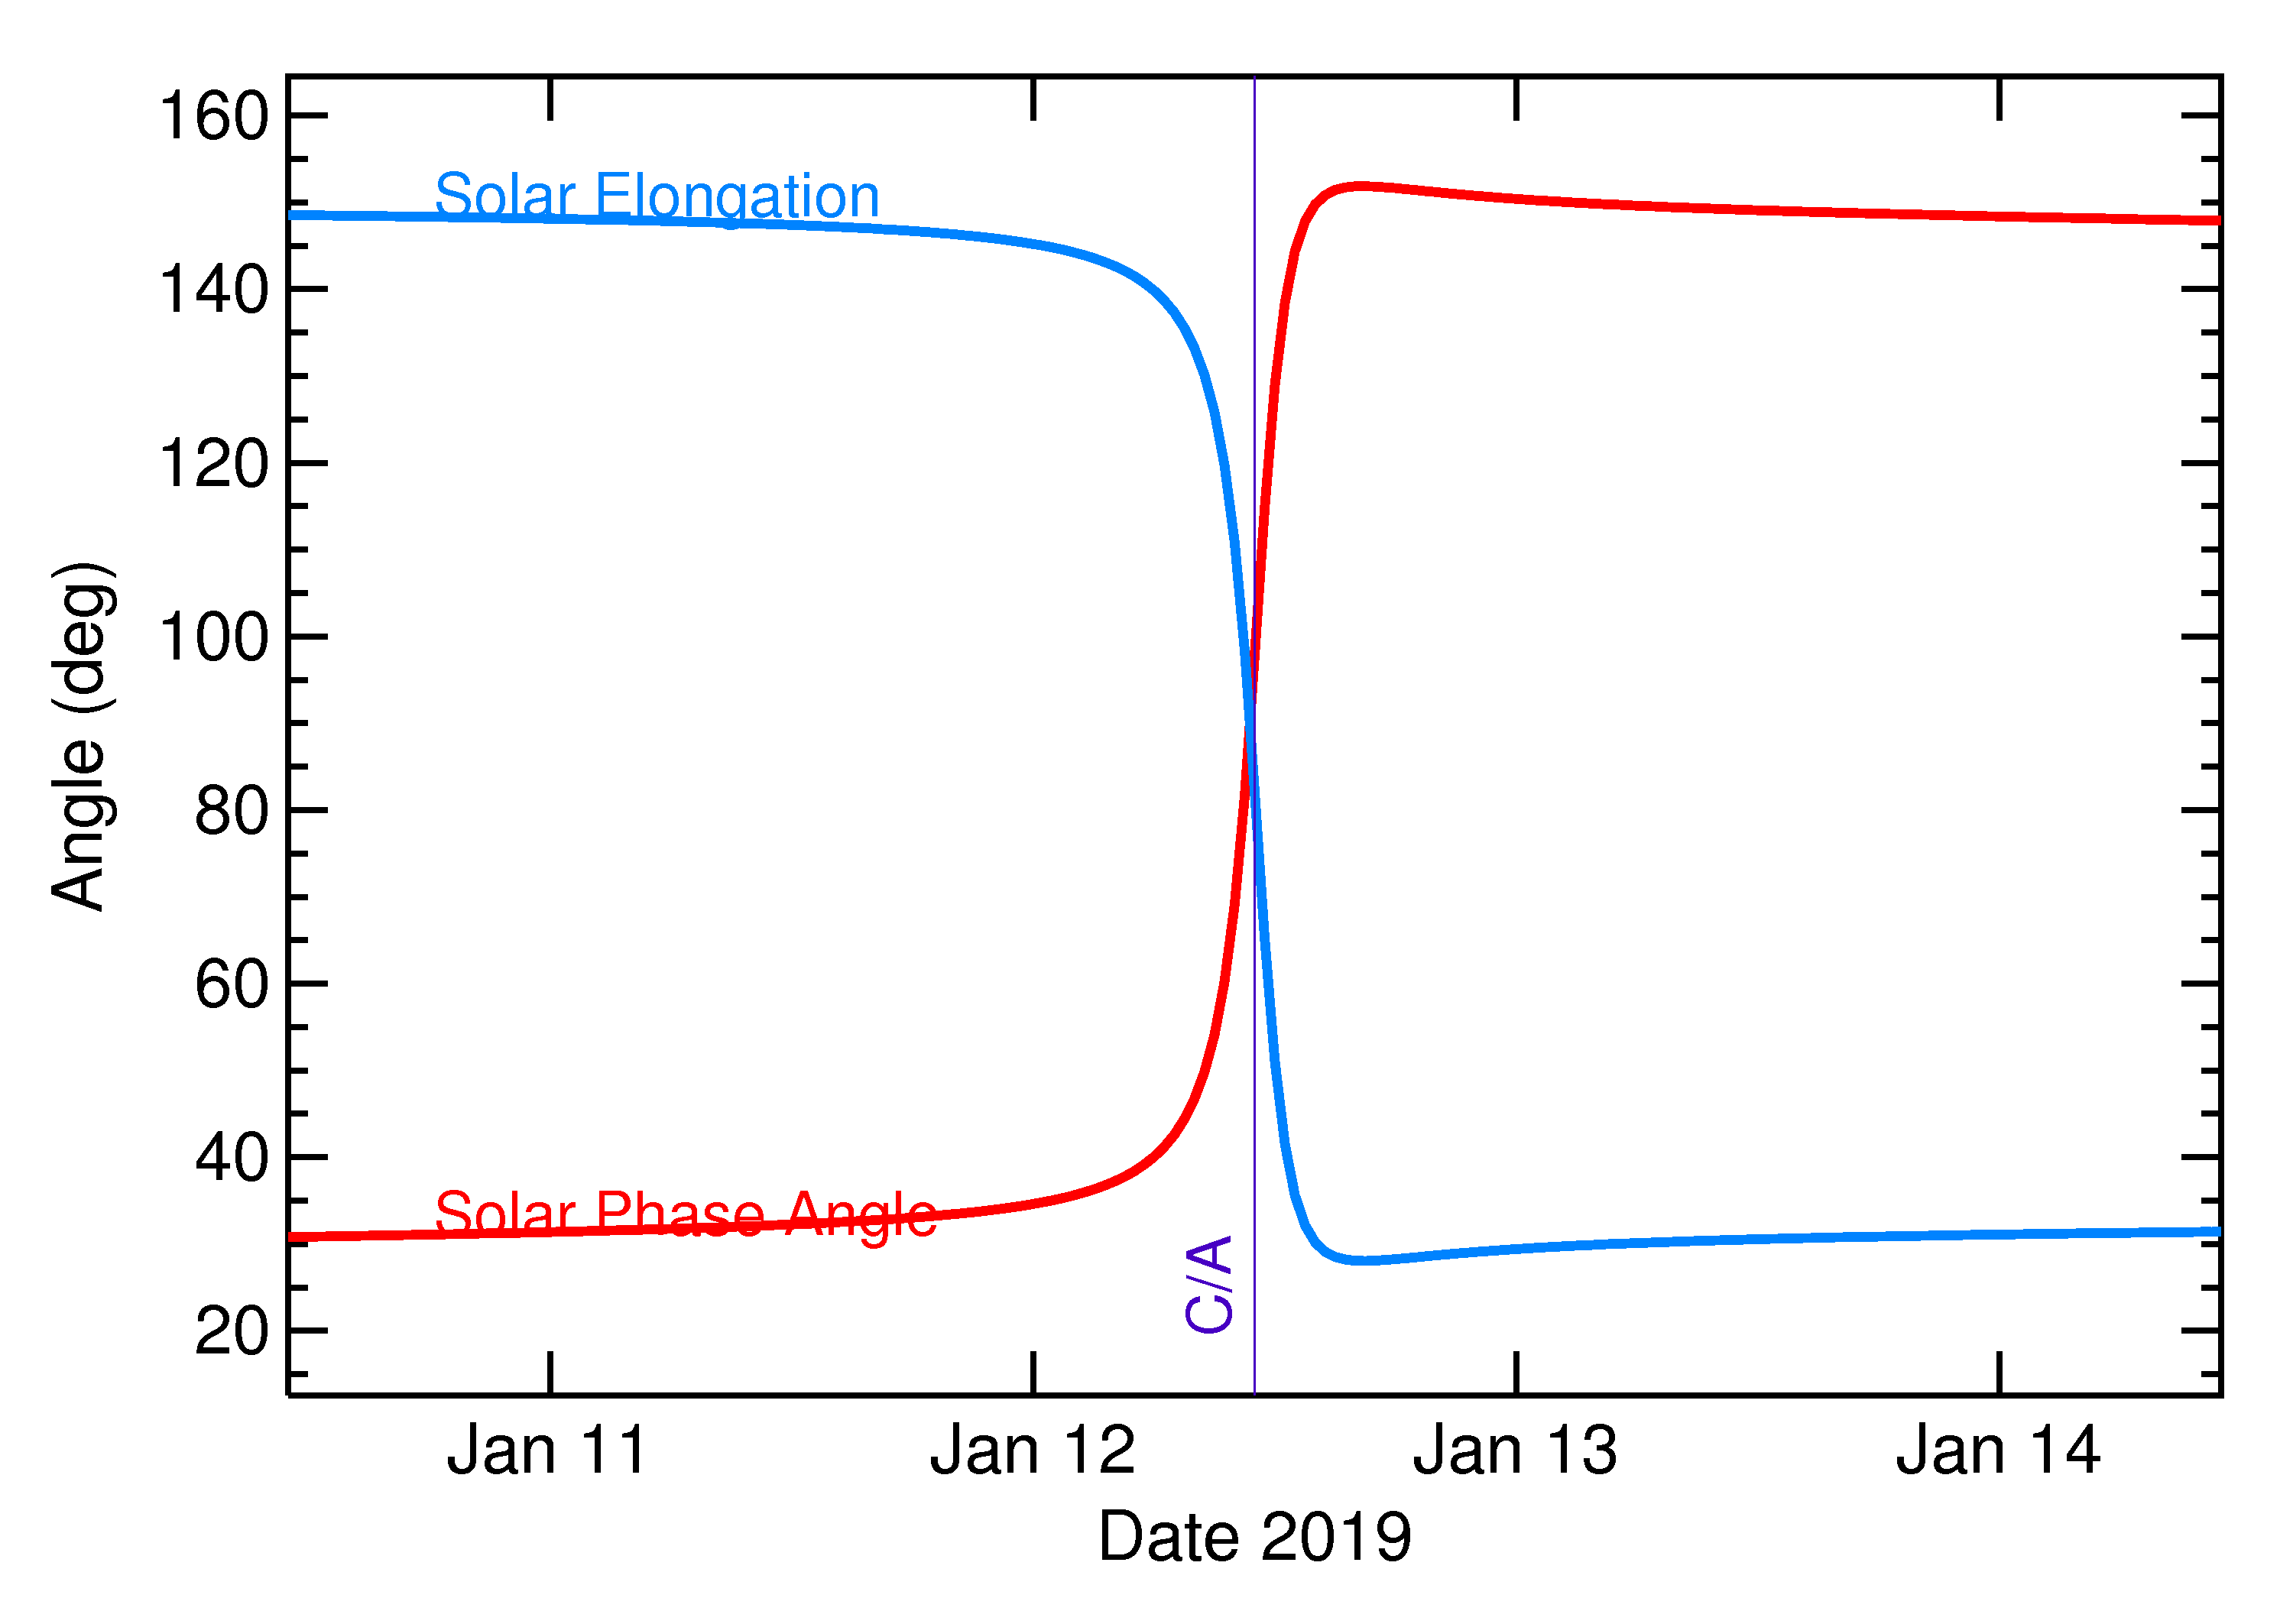 Solar Elongation and Solar Phase Angle of 2019 AE9 in the days around closest approach